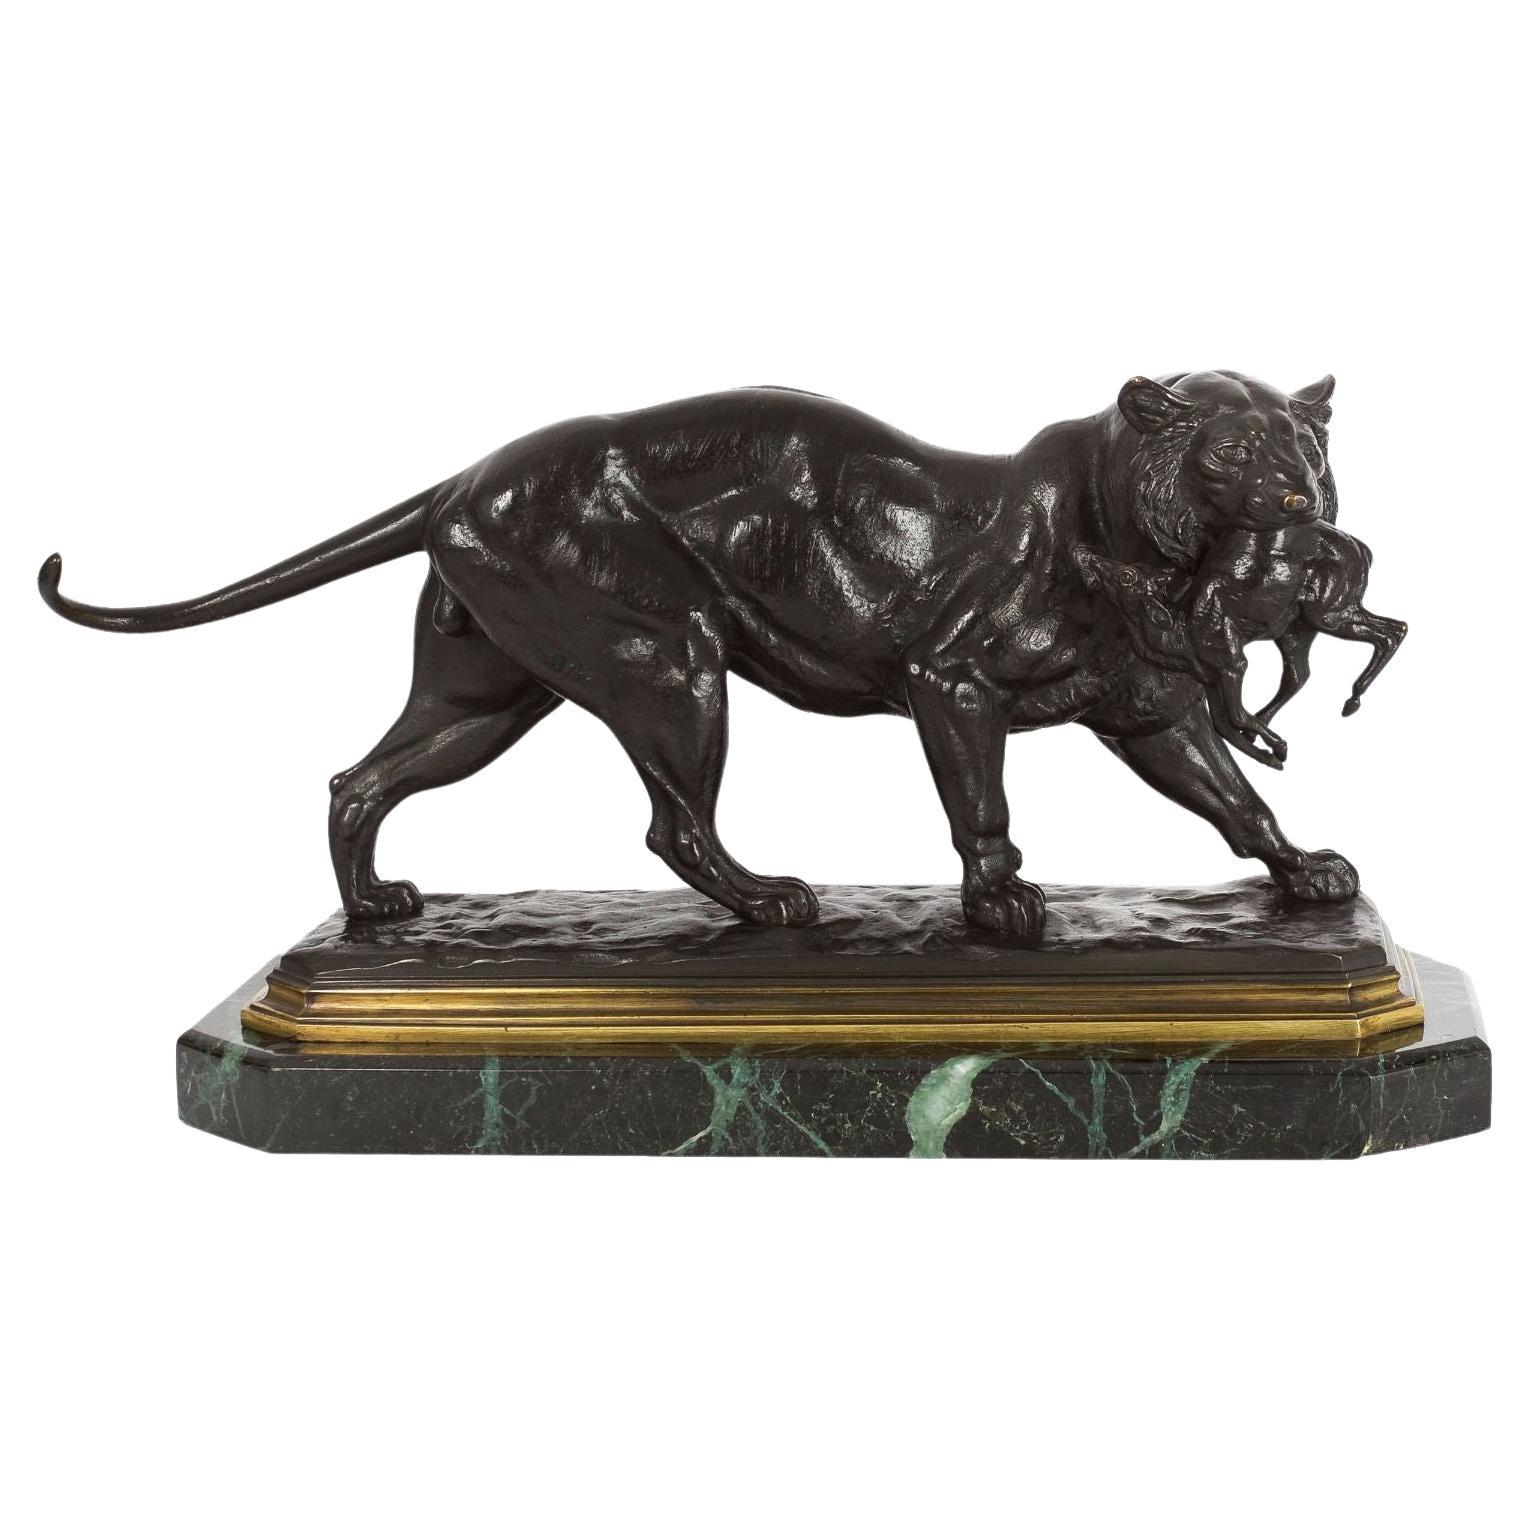 French Antique Bronze Sculpture of Tiger Carrying Gazelle by Paul-Édouard Delabr